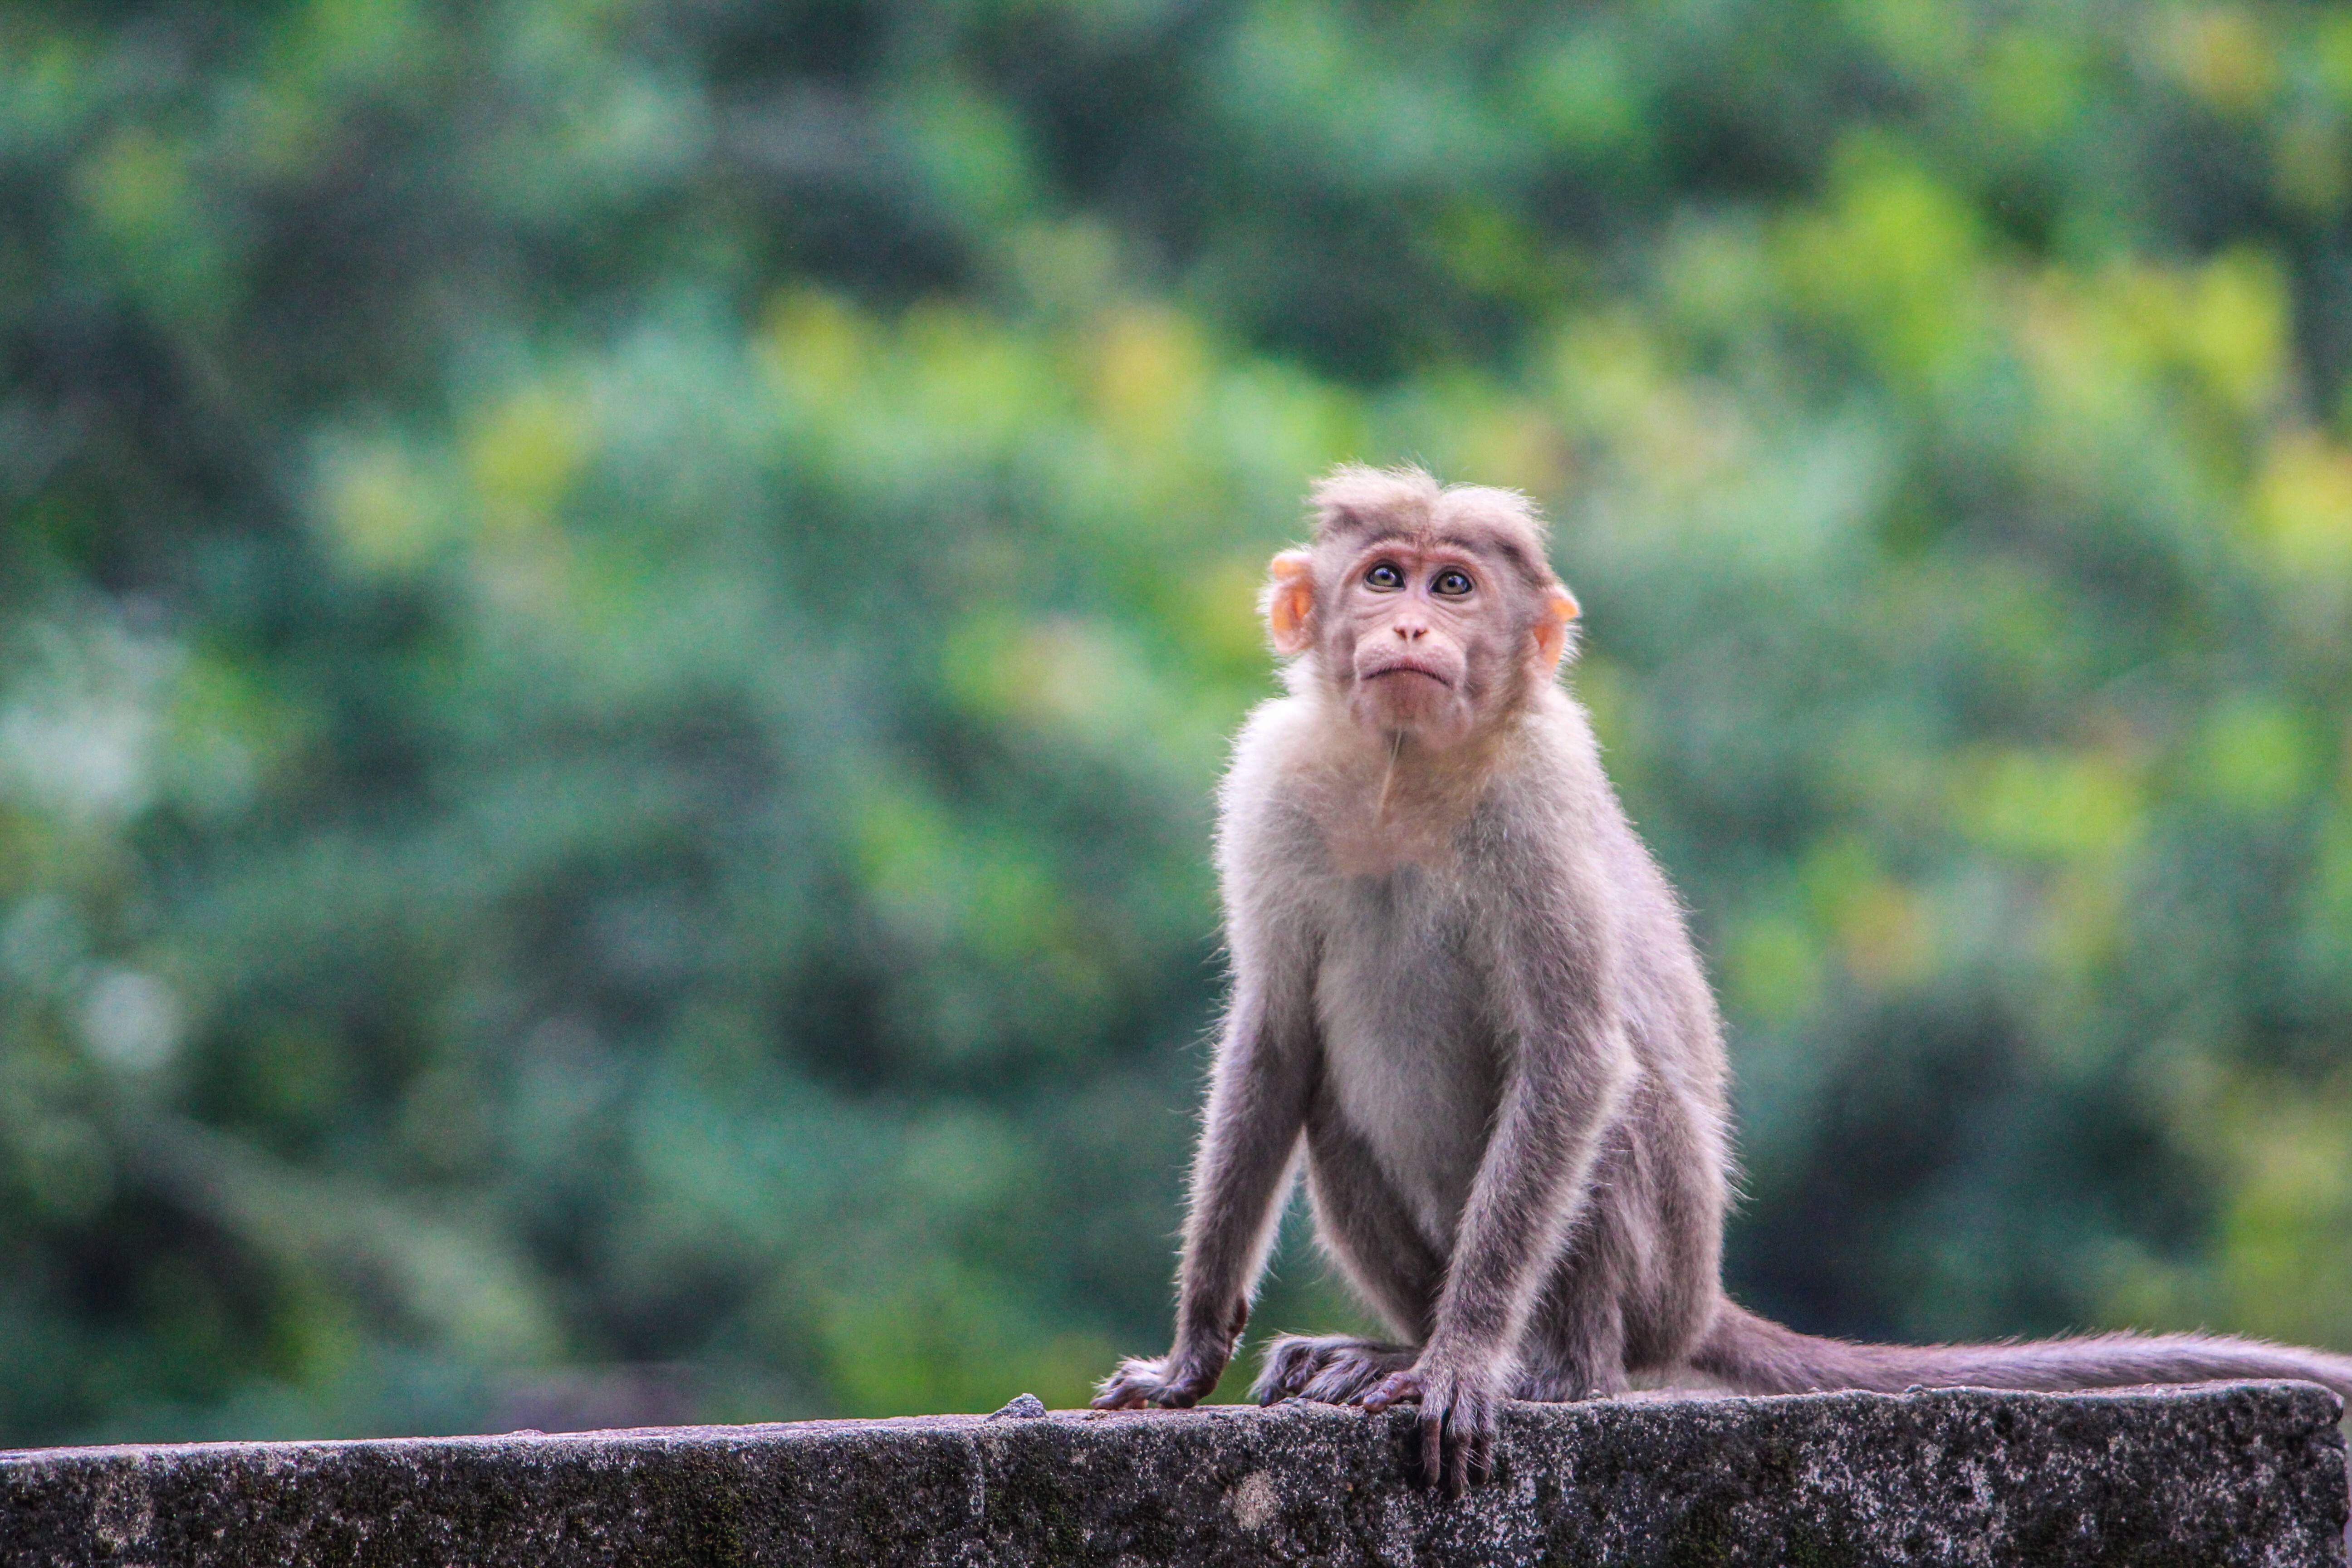 Coronavirus: US vaccine protects macaques from Covid-19, studies show |  South China Morning Post